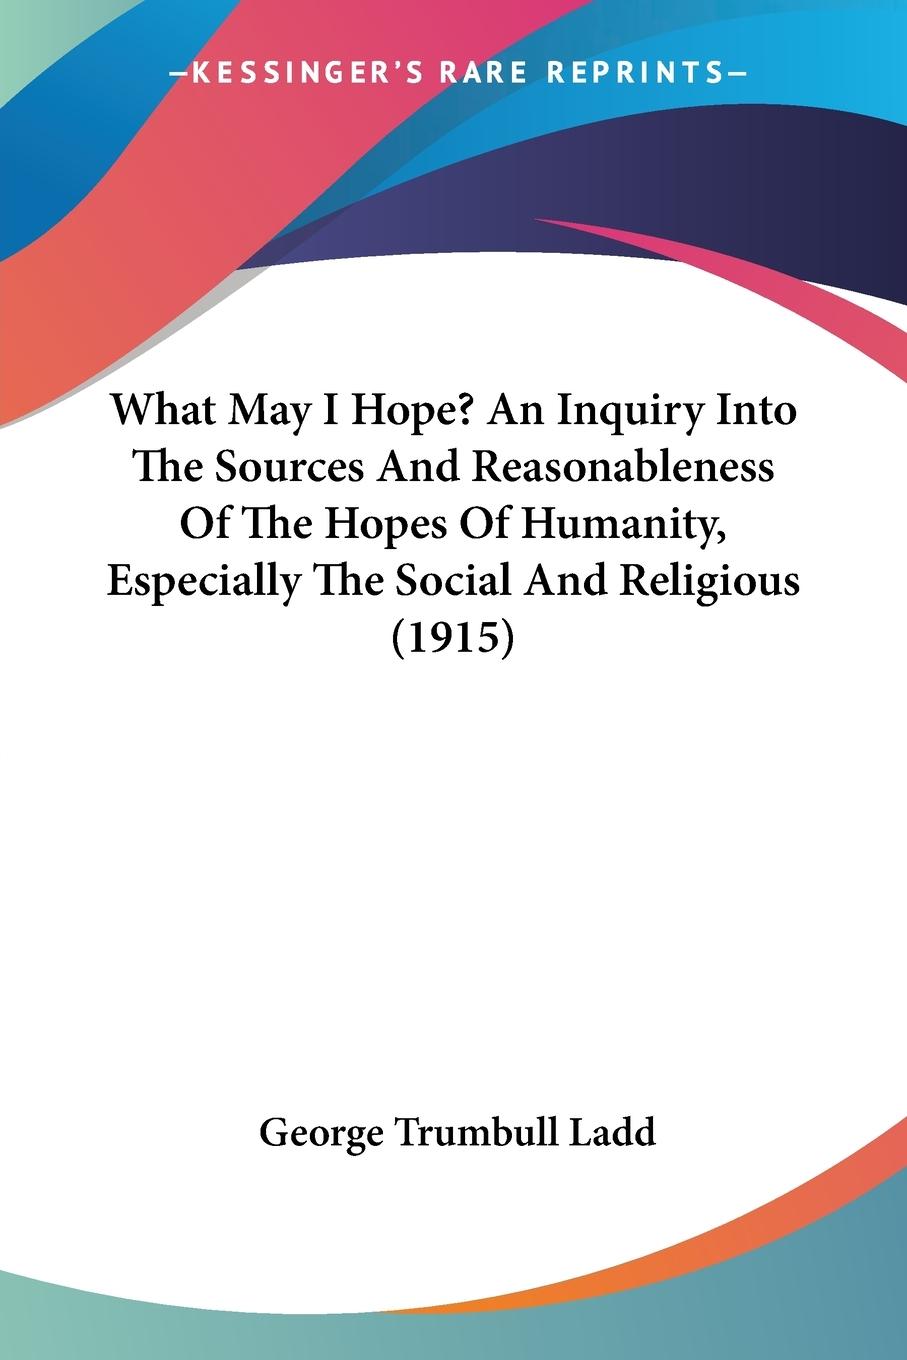 What May I Hope? An Inquiry Into The Sources And Reasonableness Of The Hopes Of Humanity, Especially The Social And Religious (1915) - Ladd, George Trumbull